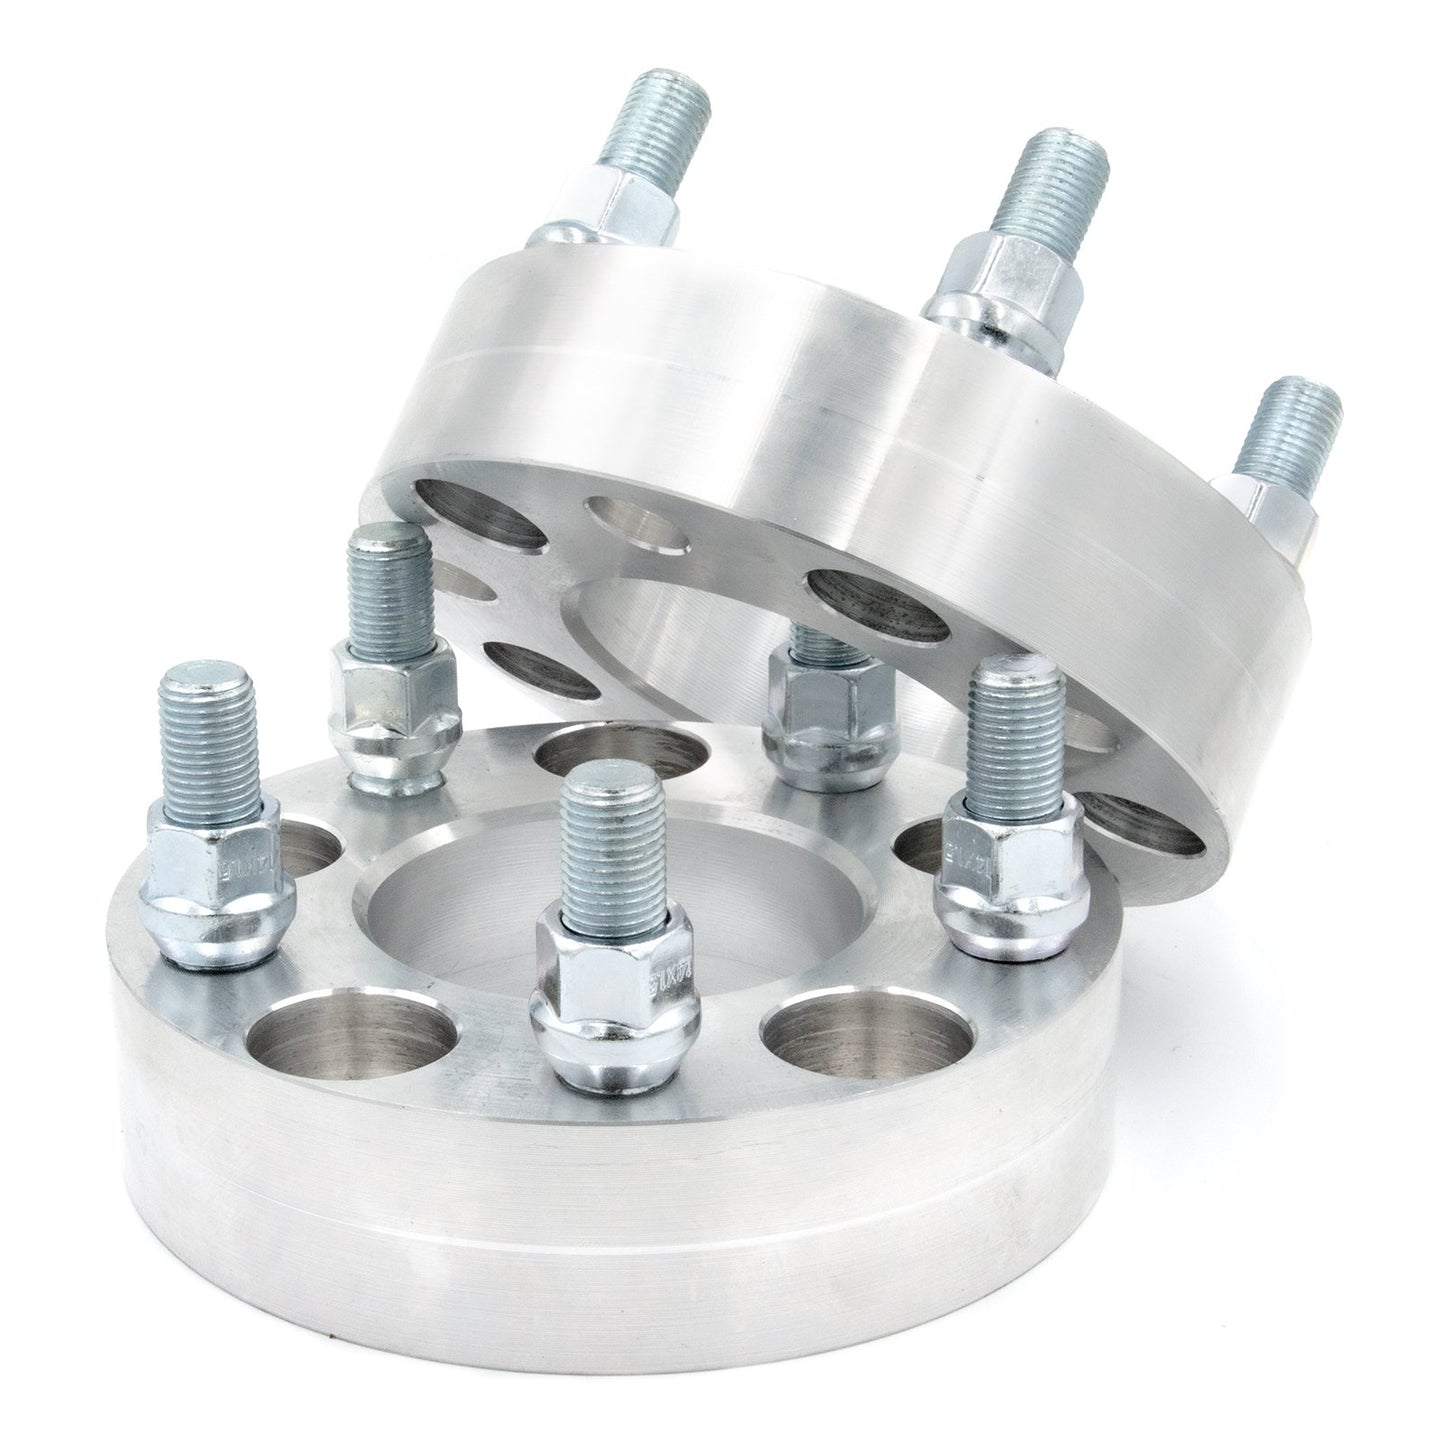 5x4.5" to 5x5" Wheel Spacer/Adapter - Thickness: 3/4"- 4"